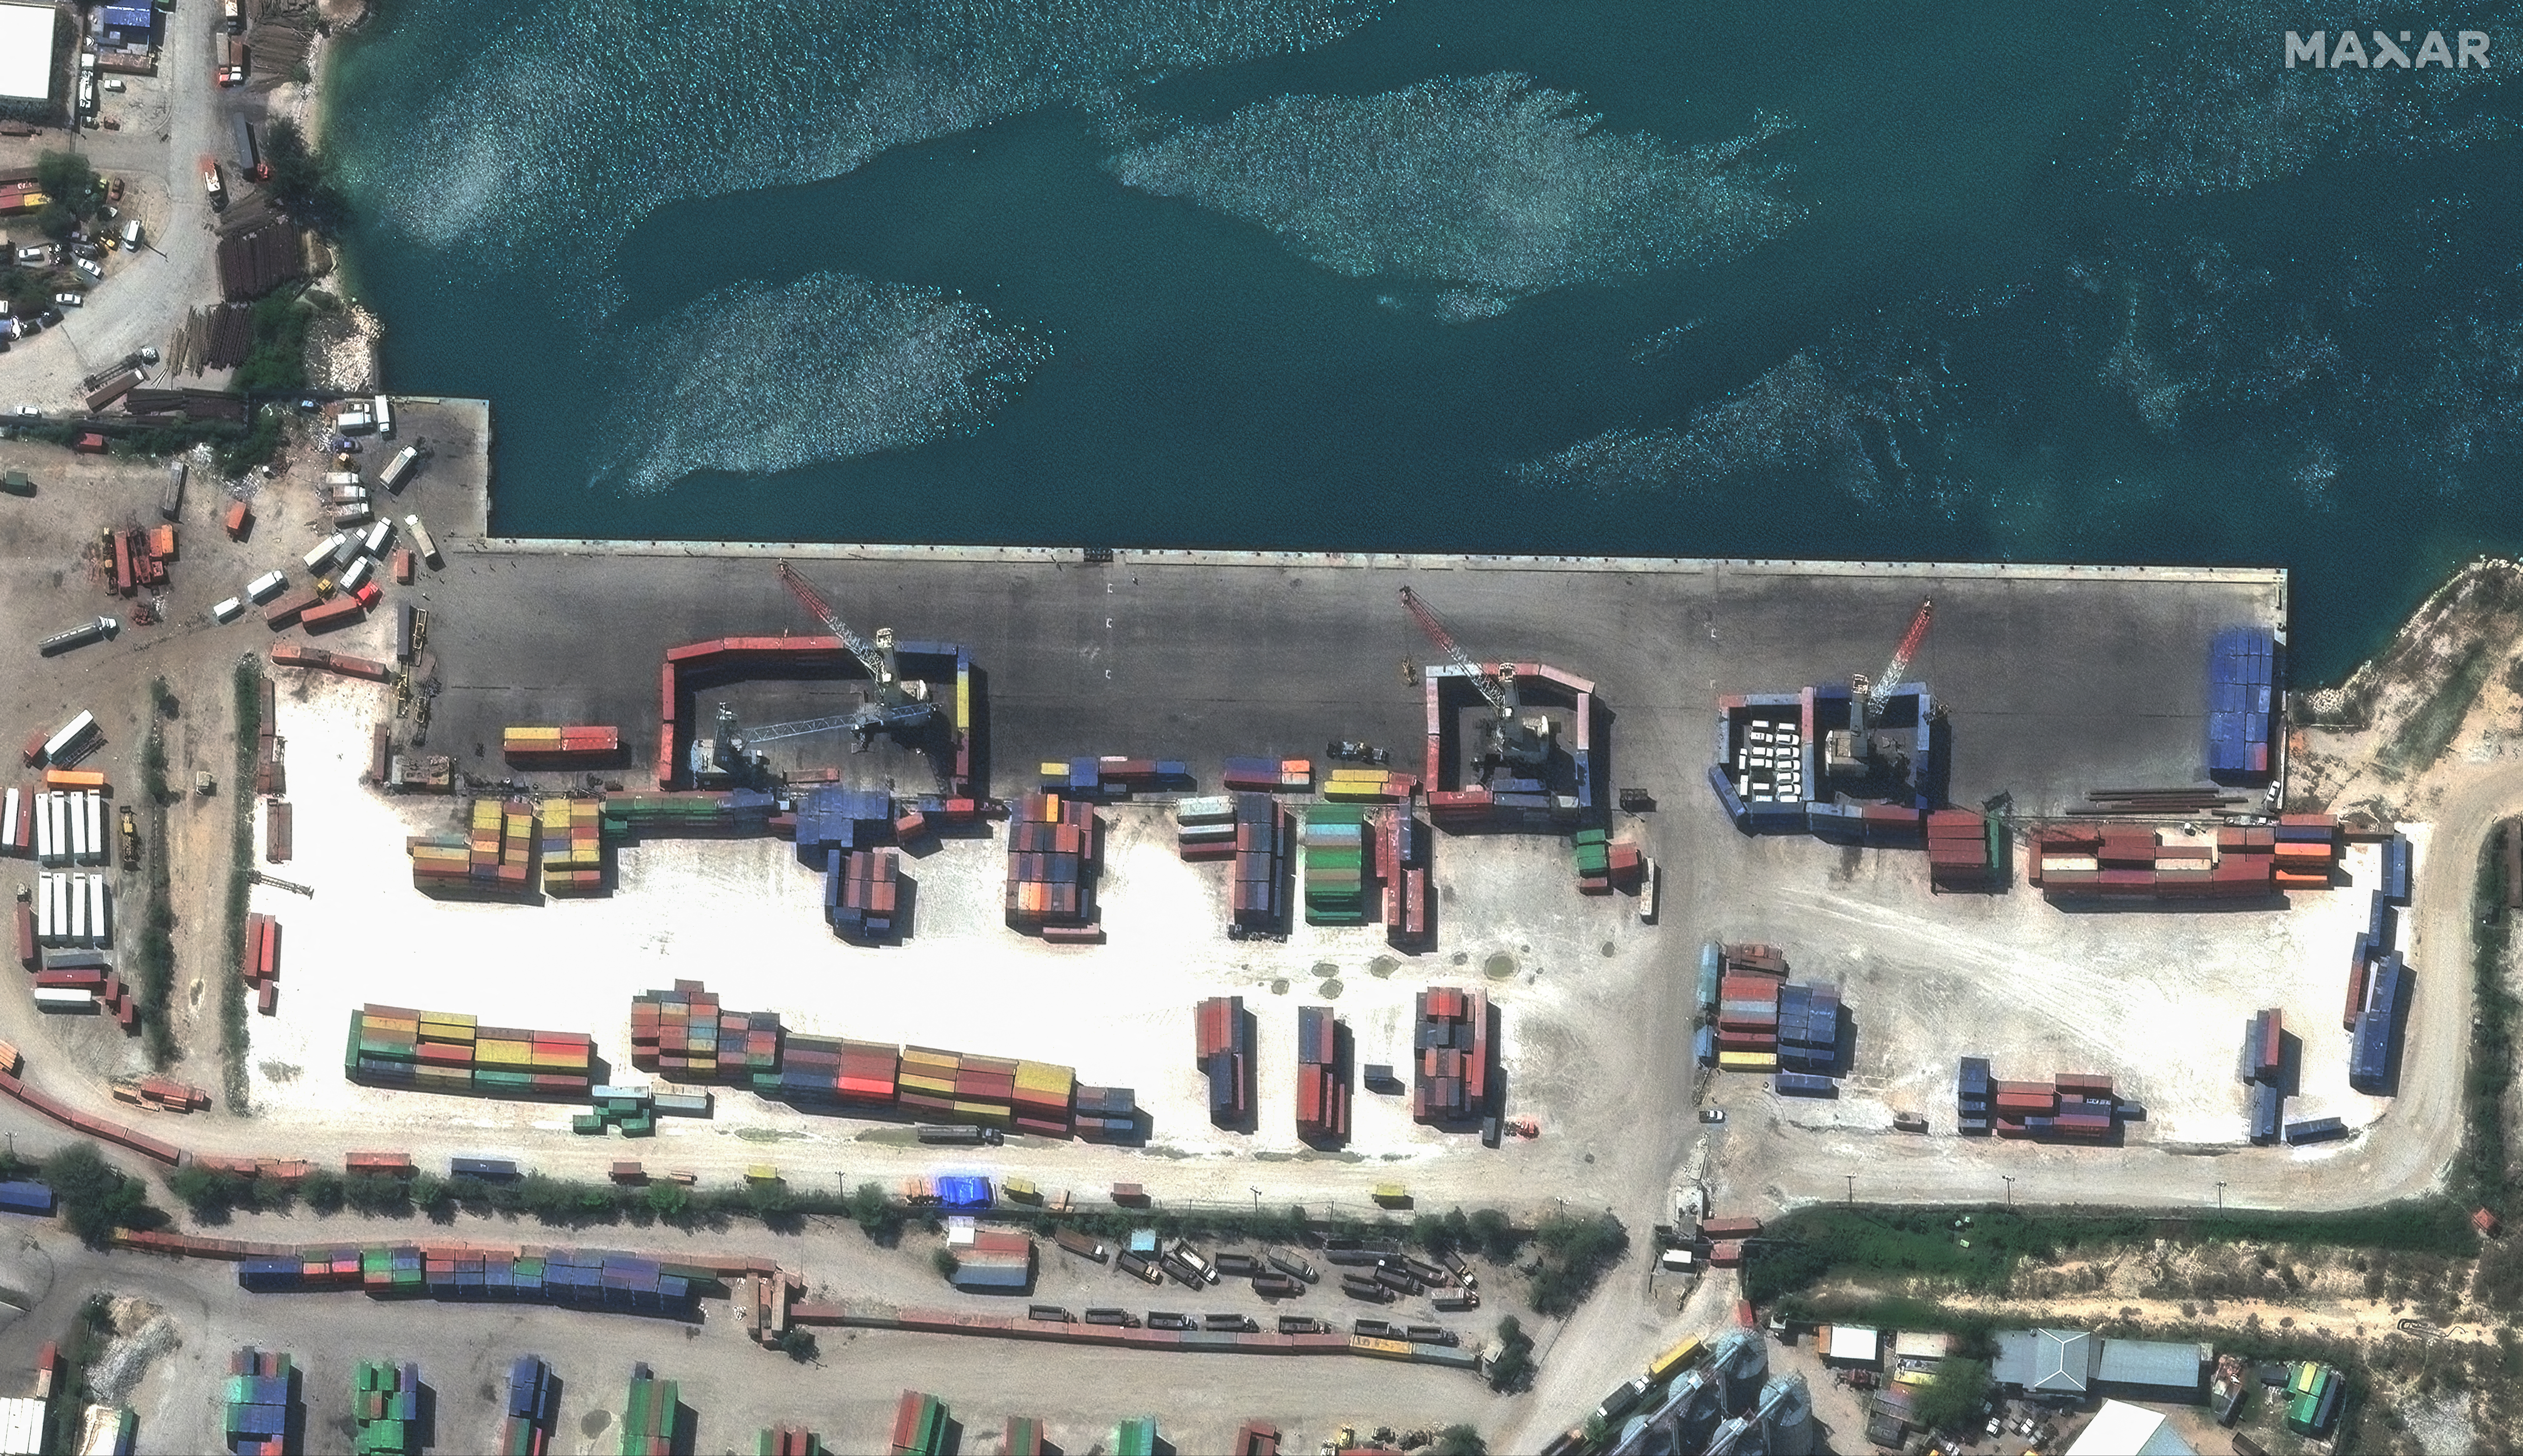 A satellite image shows shipping containers used to block access to heavy cranes, in Port-au-Princ. In this handout image. Maxar Technologies/Handout via REUTERS